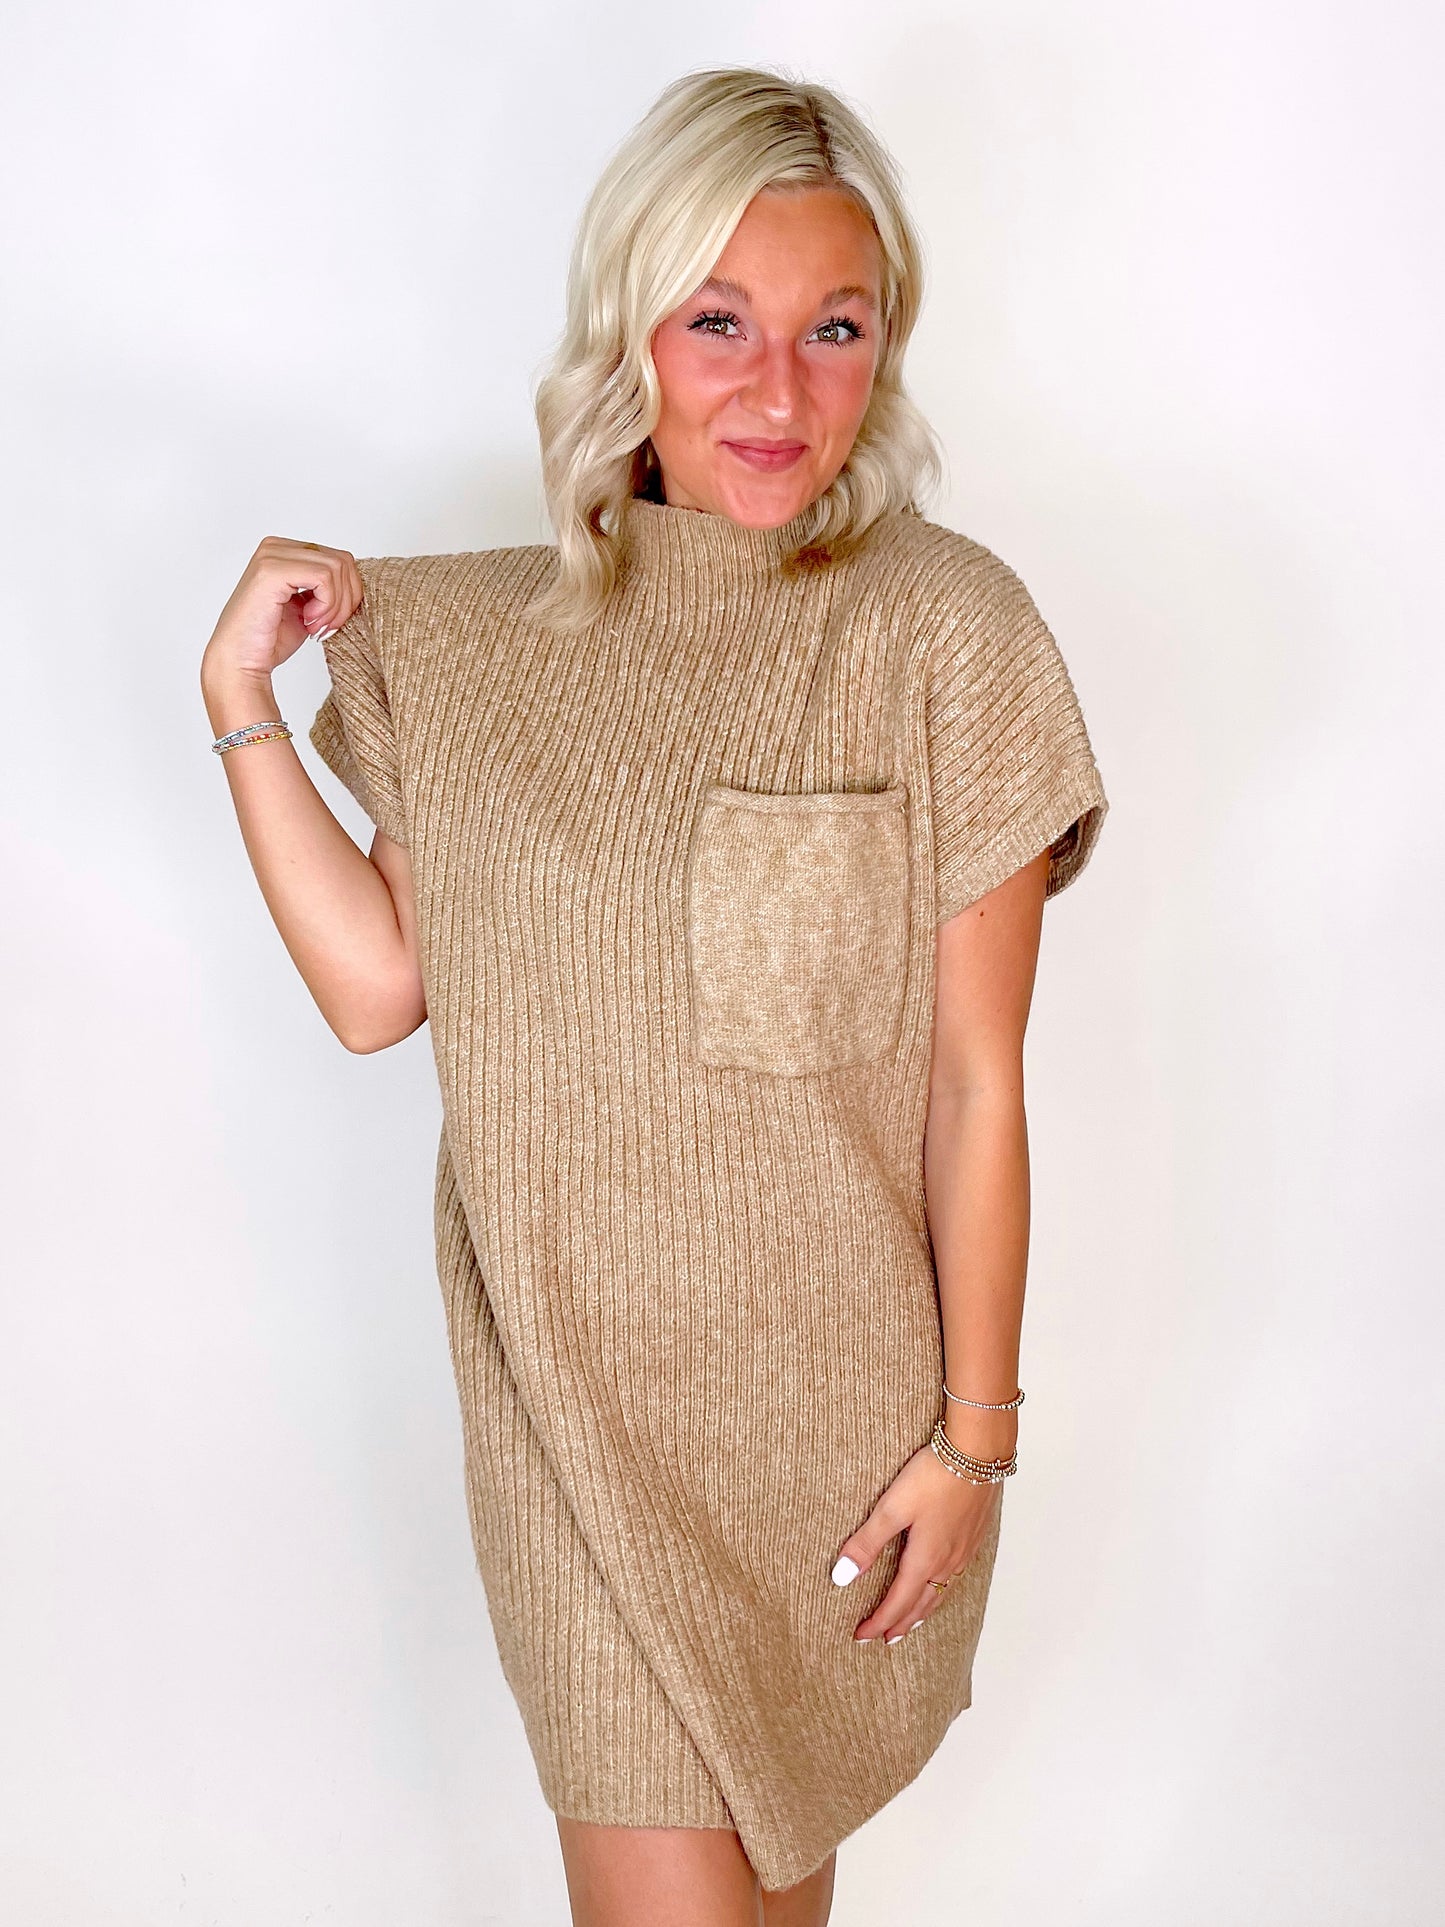 The Chloe Sweater Dress-Mini Dress-Entro-The Village Shoppe, Women’s Fashion Boutique, Shop Online and In Store - Located in Muscle Shoals, AL.